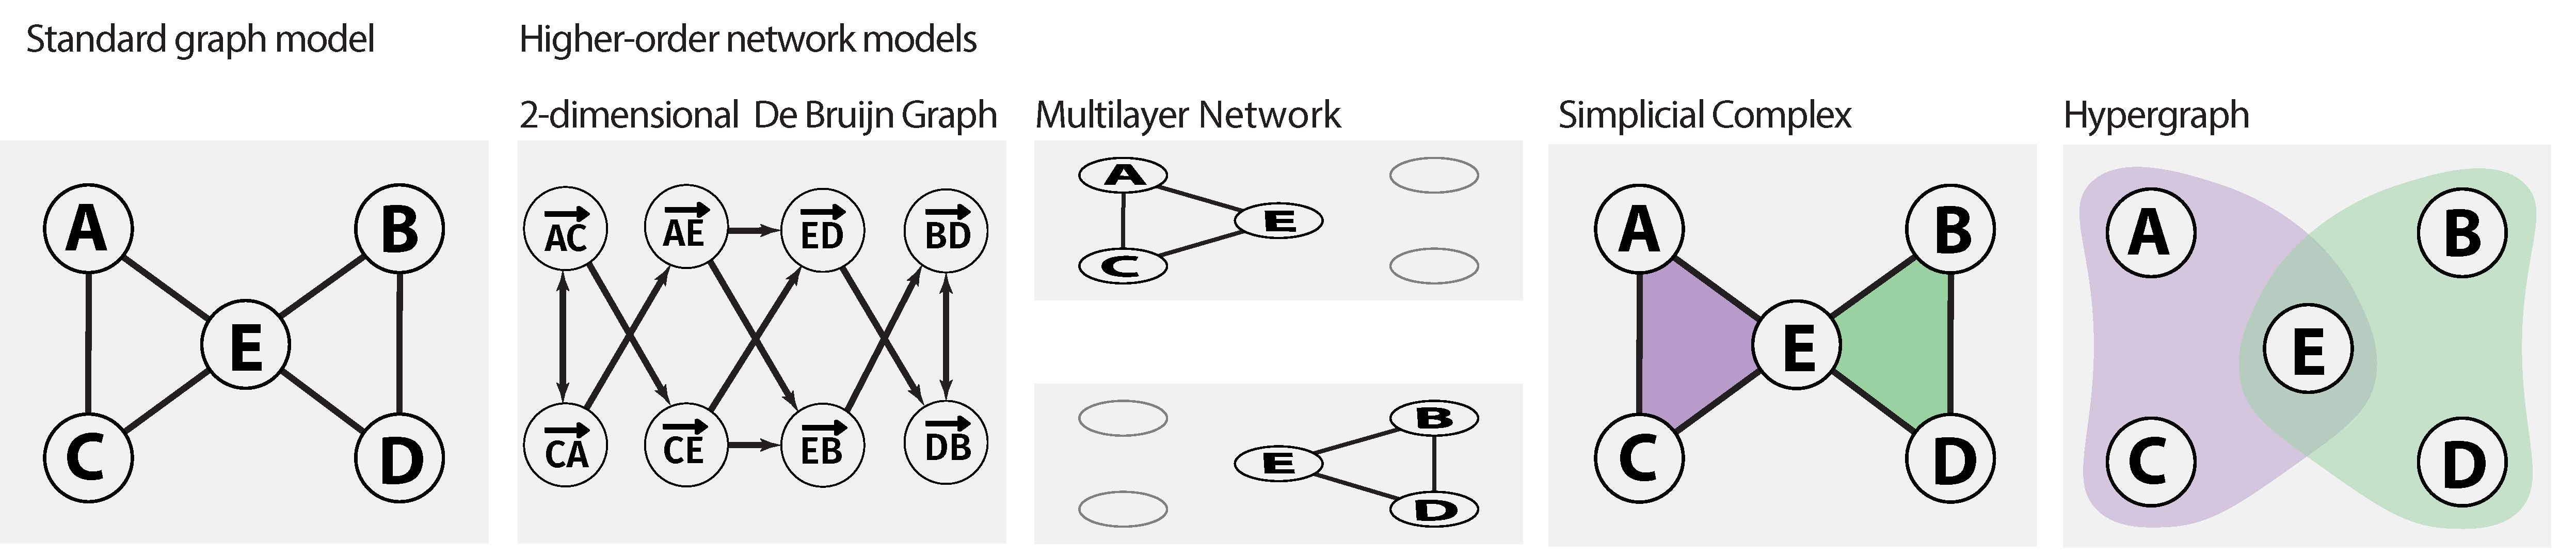 Figure 1 Illustration of standard graph model (left) and four modelling approaches capturing different types of higher-order interactions proposed in topological data analysis, network science,
and computer science. Figure adapted from [15].